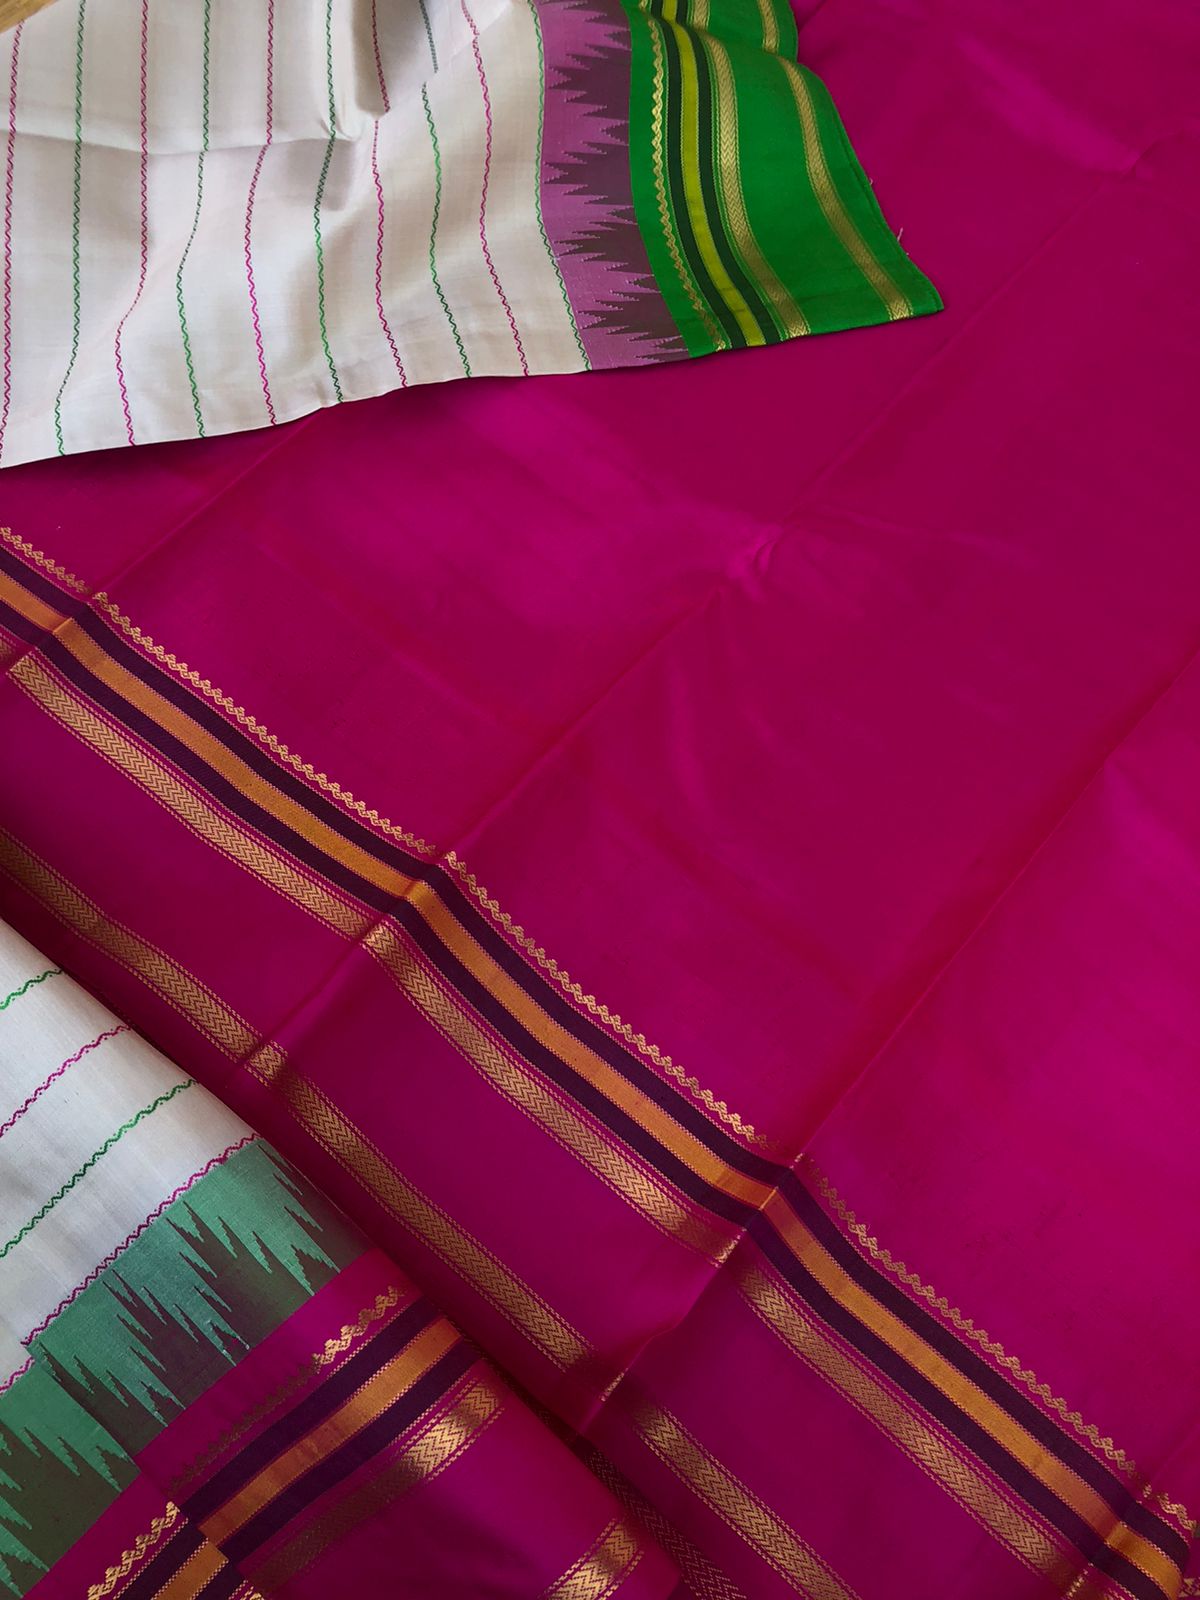 Korvai Connection on Kanchivaram - most beautiful pale greyish off white with green and pink ganga jammuna woven borders